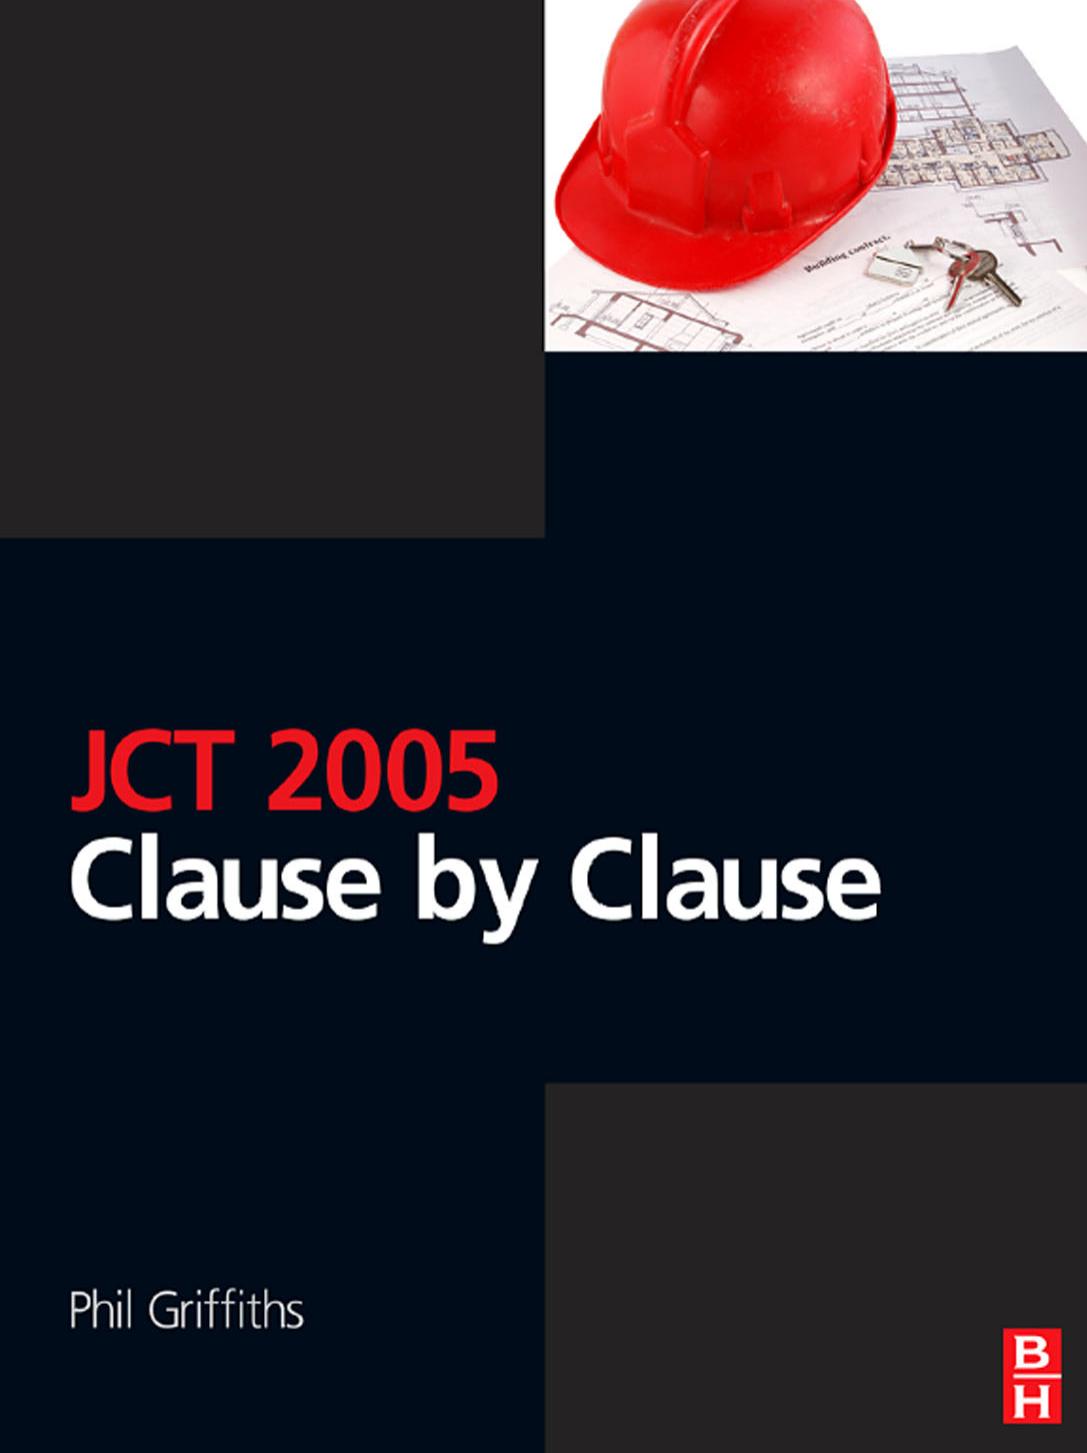 JCT 2005: Clause by Clause.